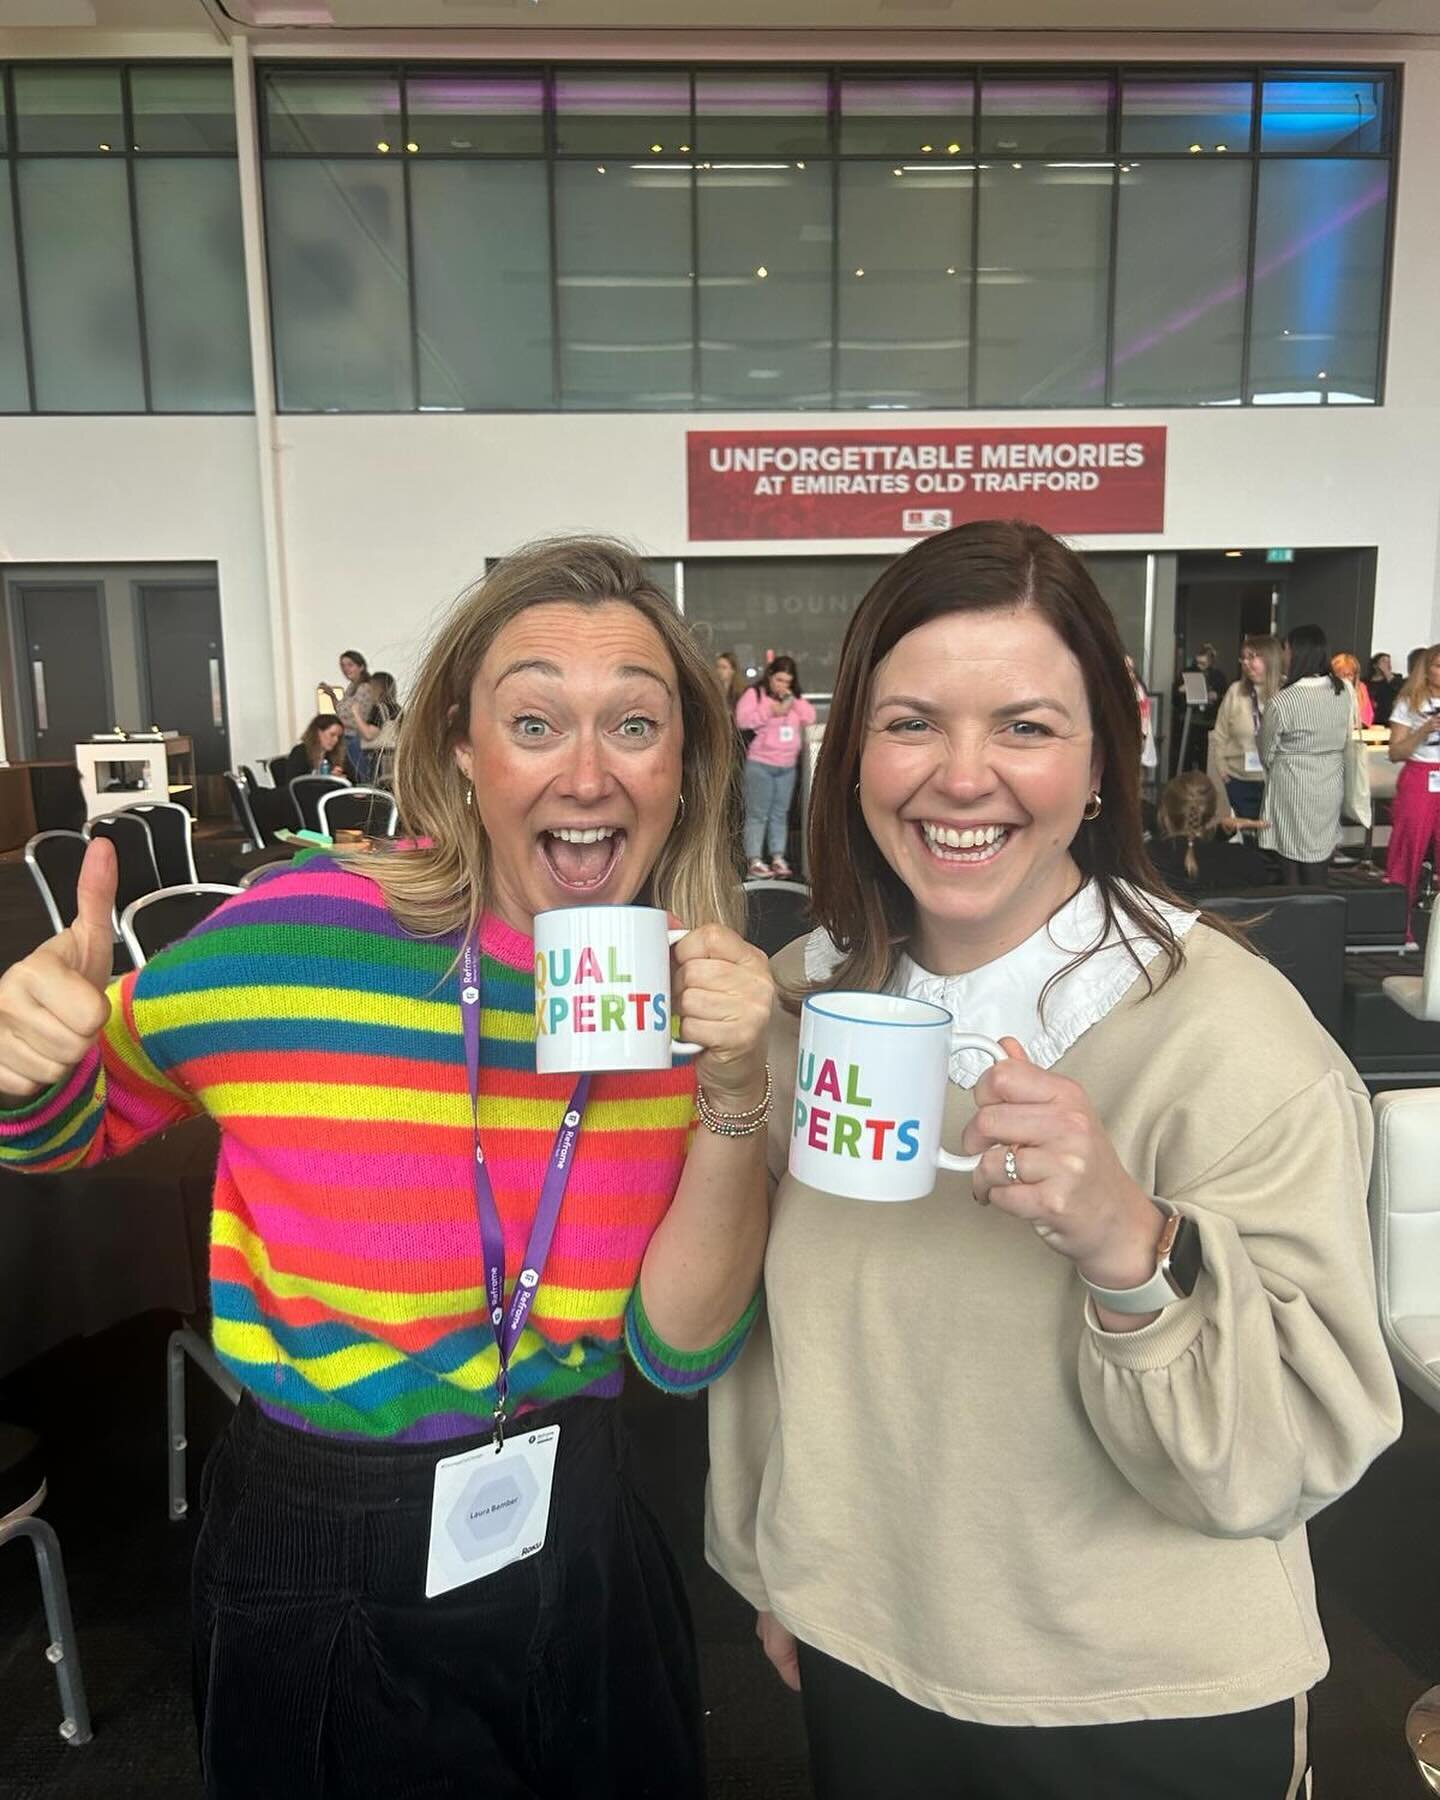 We have very fizzy energy this week after attending the @reframewit last week! 🍾 

Some highlights which we are mulling this week&hellip;🤔 

🌟 Loved the insights about using employee networks + communities within organisations to drive meaningful 